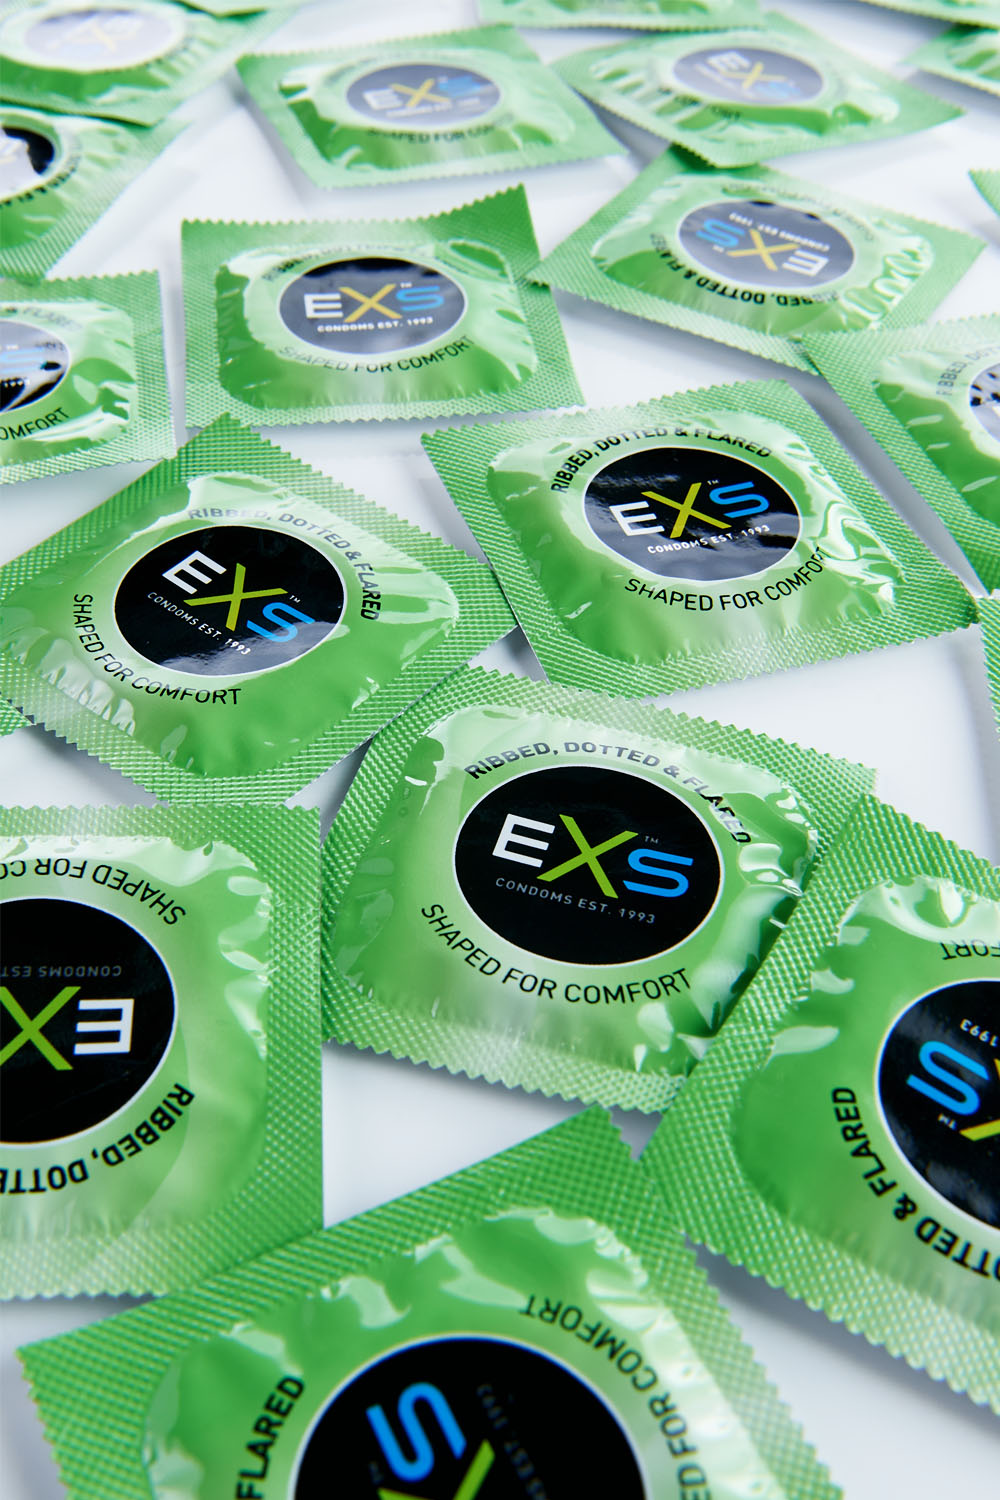 EXS Ribbed, Dotted & Flared Condoms 24 Pack